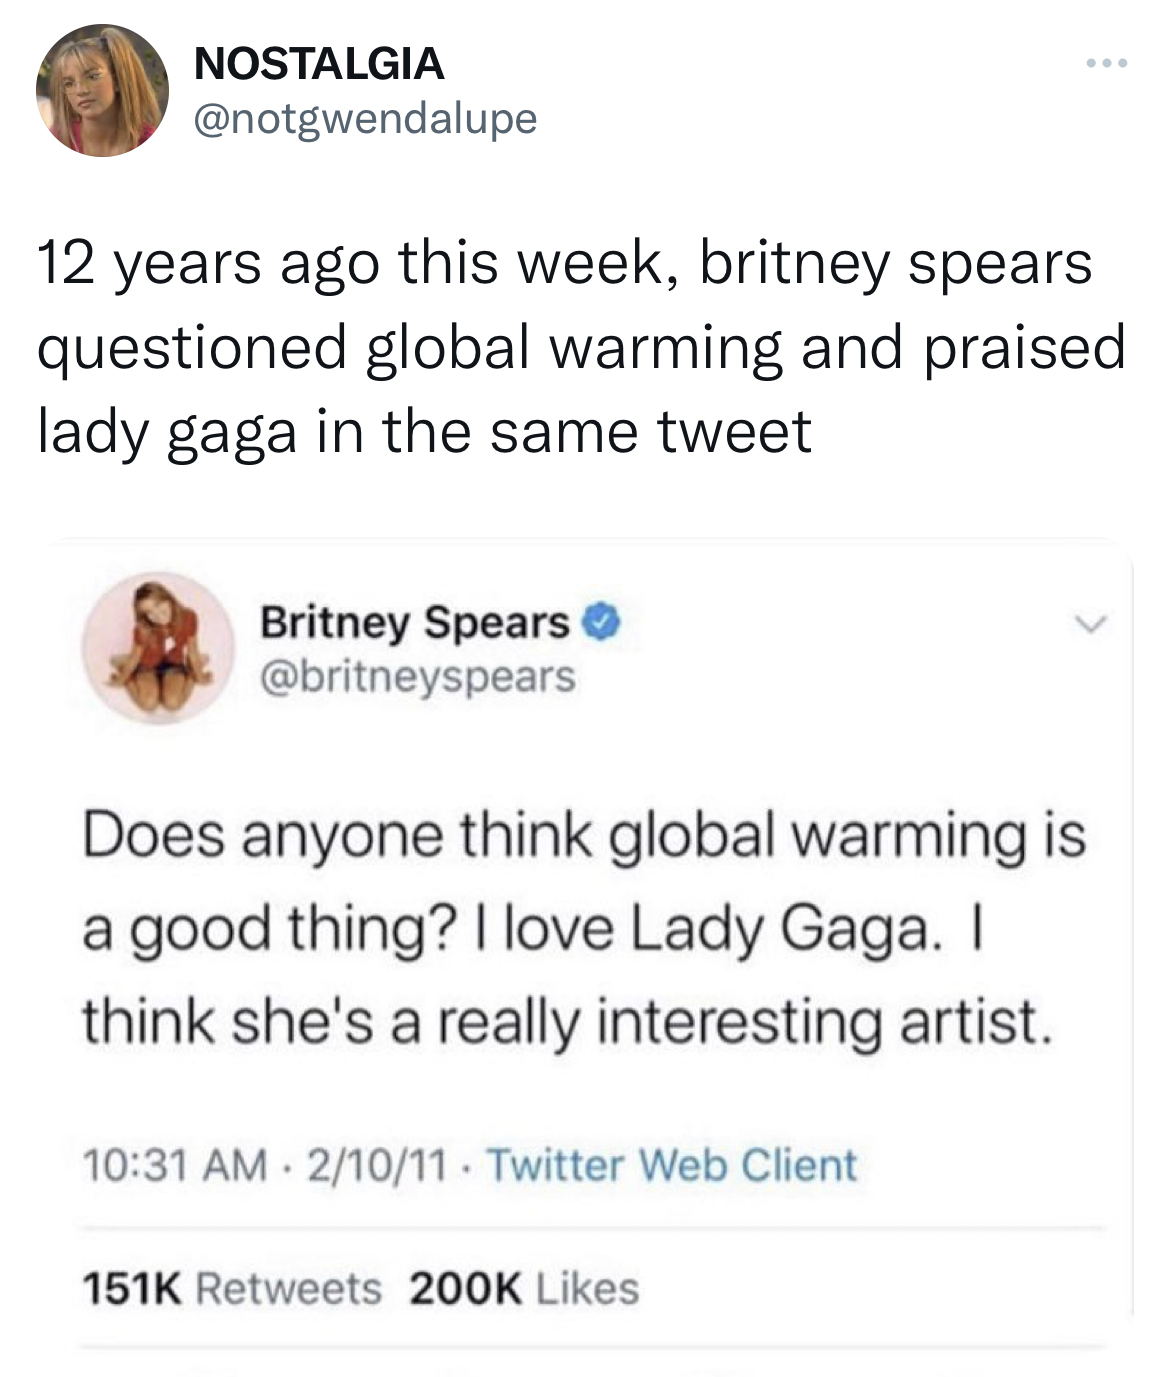 deranged tweets - document - Nostalgia 12 years ago this week, britney spears questioned global warming and praised lady gaga in the same tweet Britney Spears Does anyone think global warming is a good thing? I love Lady Gaga. I think she's a really inter